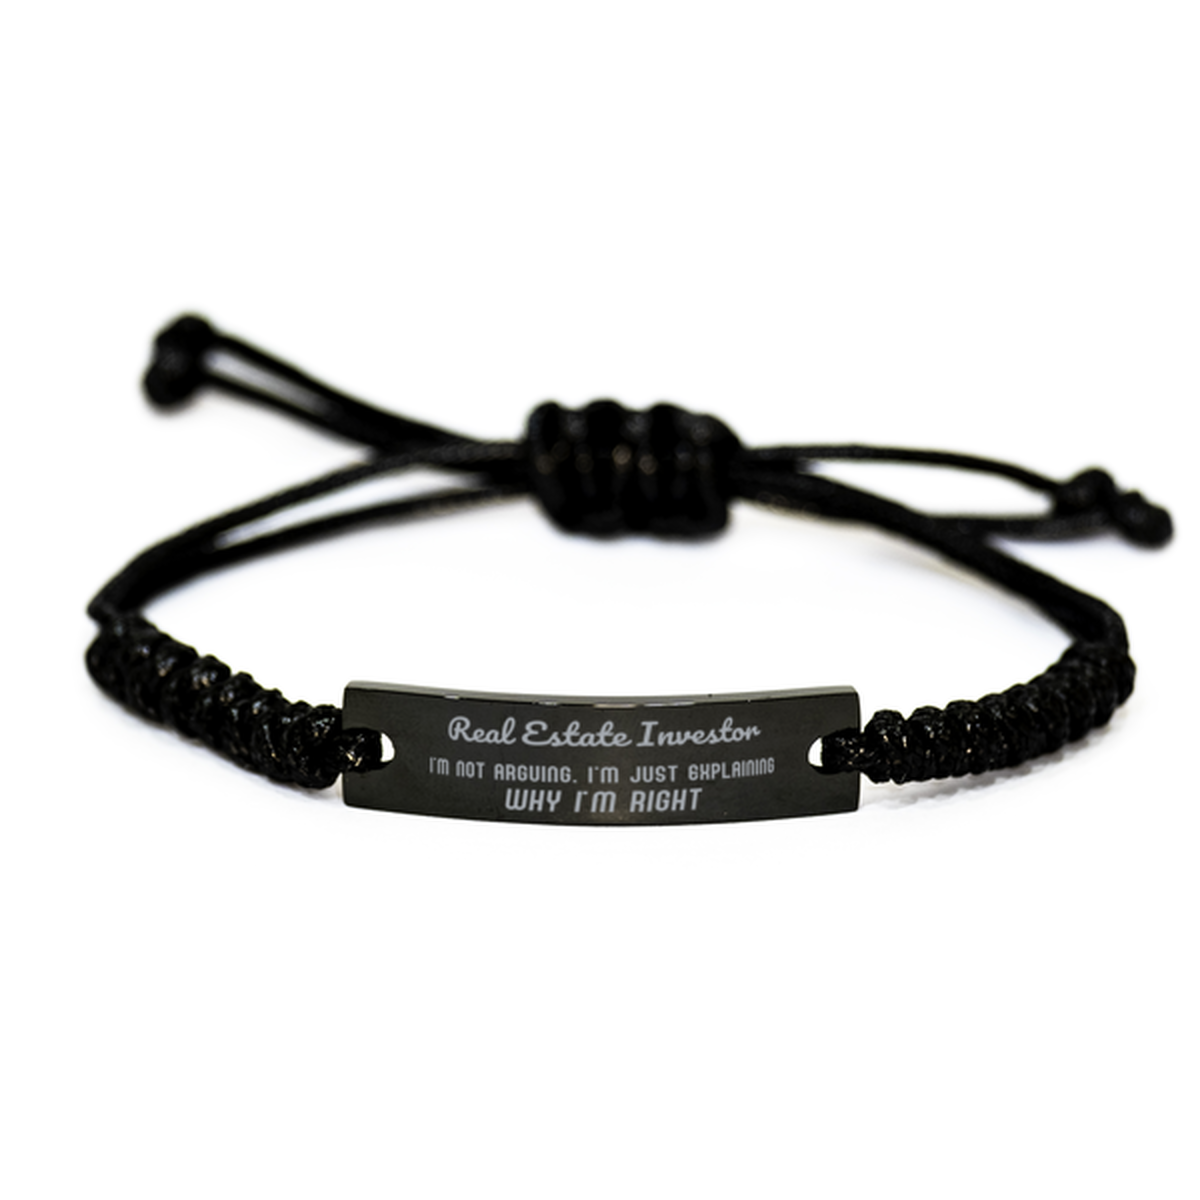 Real Estate Investor I'm not Arguing. I'm Just Explaining Why I'm RIGHT Black Rope Bracelet, Funny Saying Quote Real Estate Investor Gifts For Real Estate Investor Graduation Birthday Christmas Gifts for Men Women Coworker